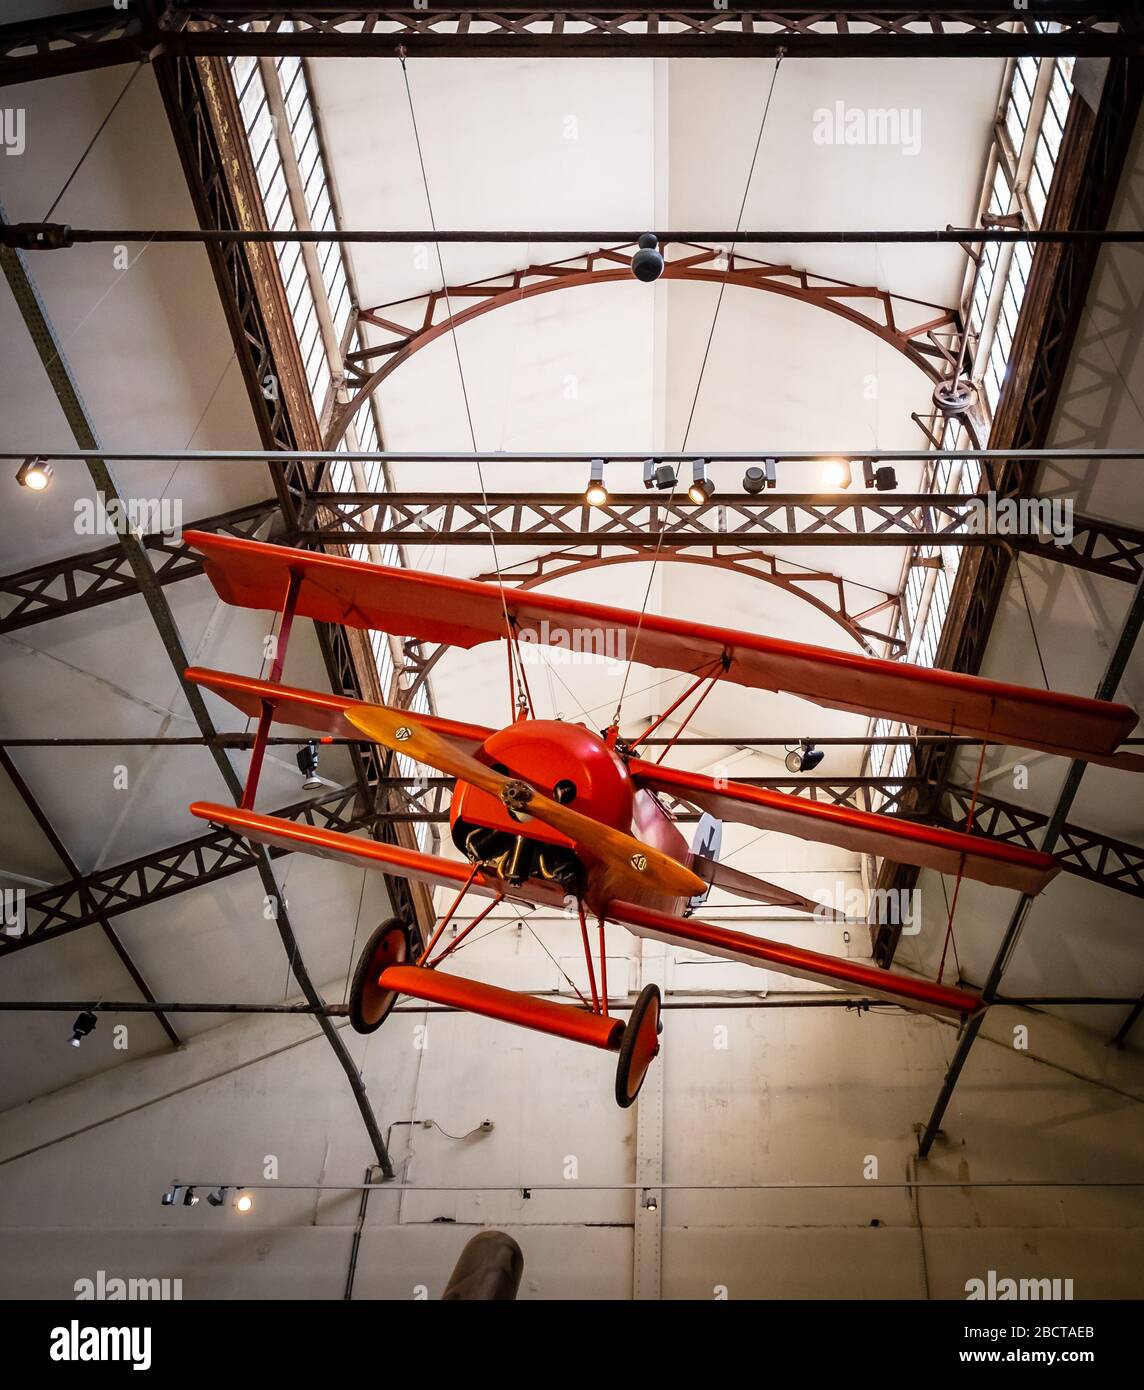 Brussels, Belgium - 20 July 2019: German army Fokker Dr.I triplane fighter aircraft at the Royal Museum of the Army and of Military History in Brussel Stock Photo